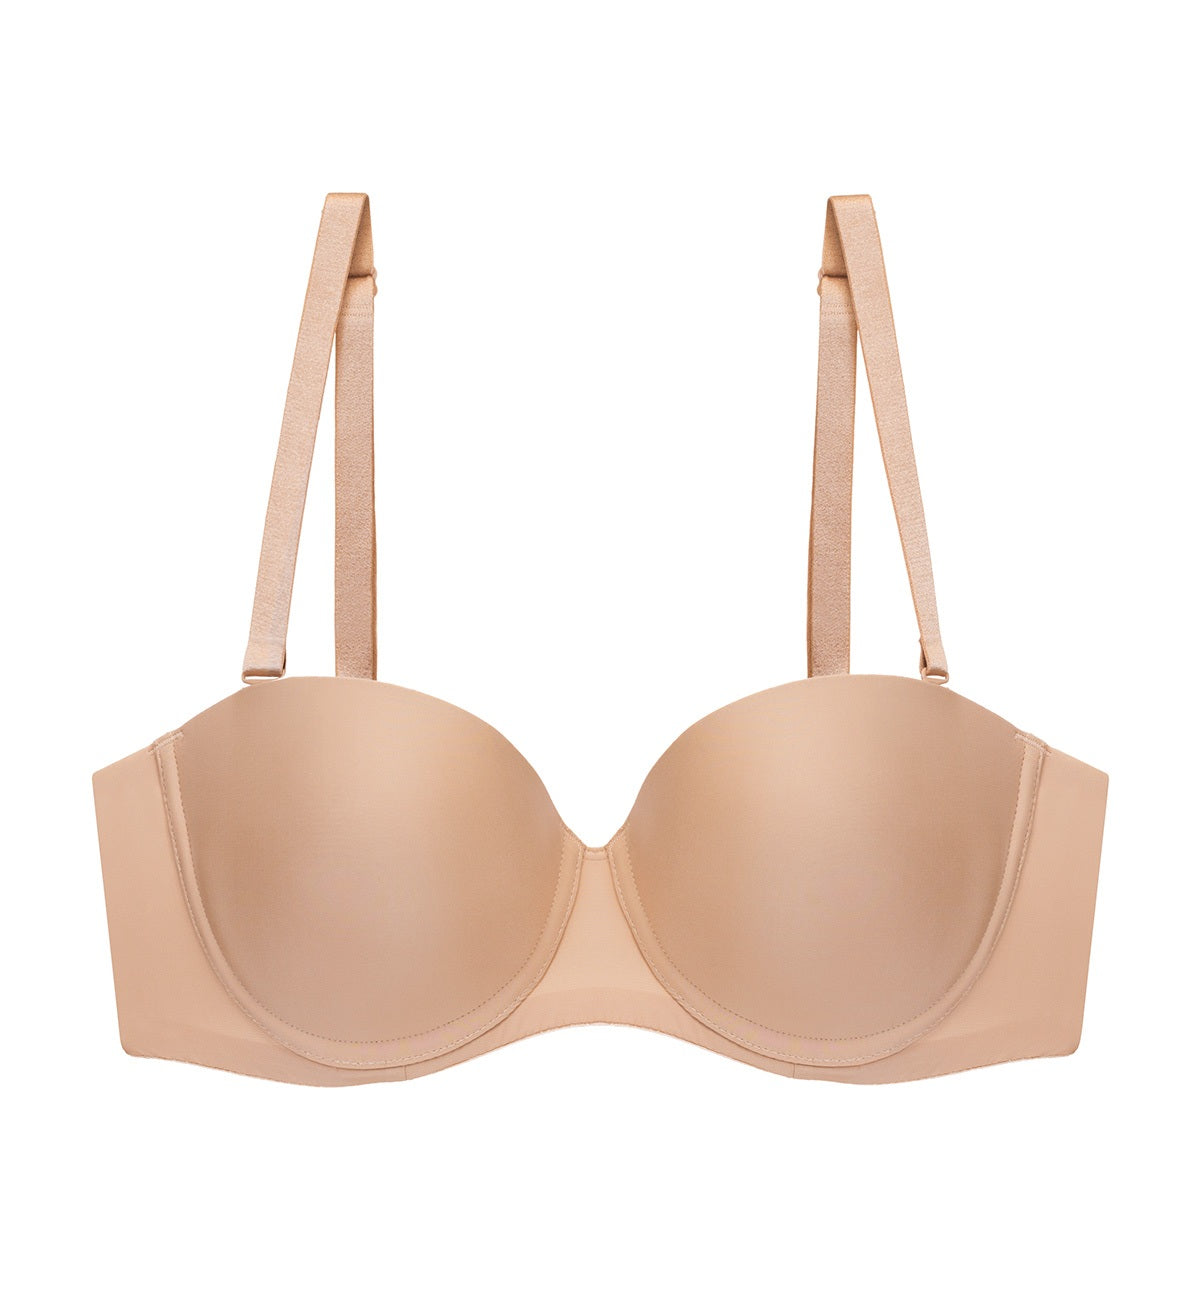 Body Make Up Wired Push Up Bra With Detachable Straps in Smooth